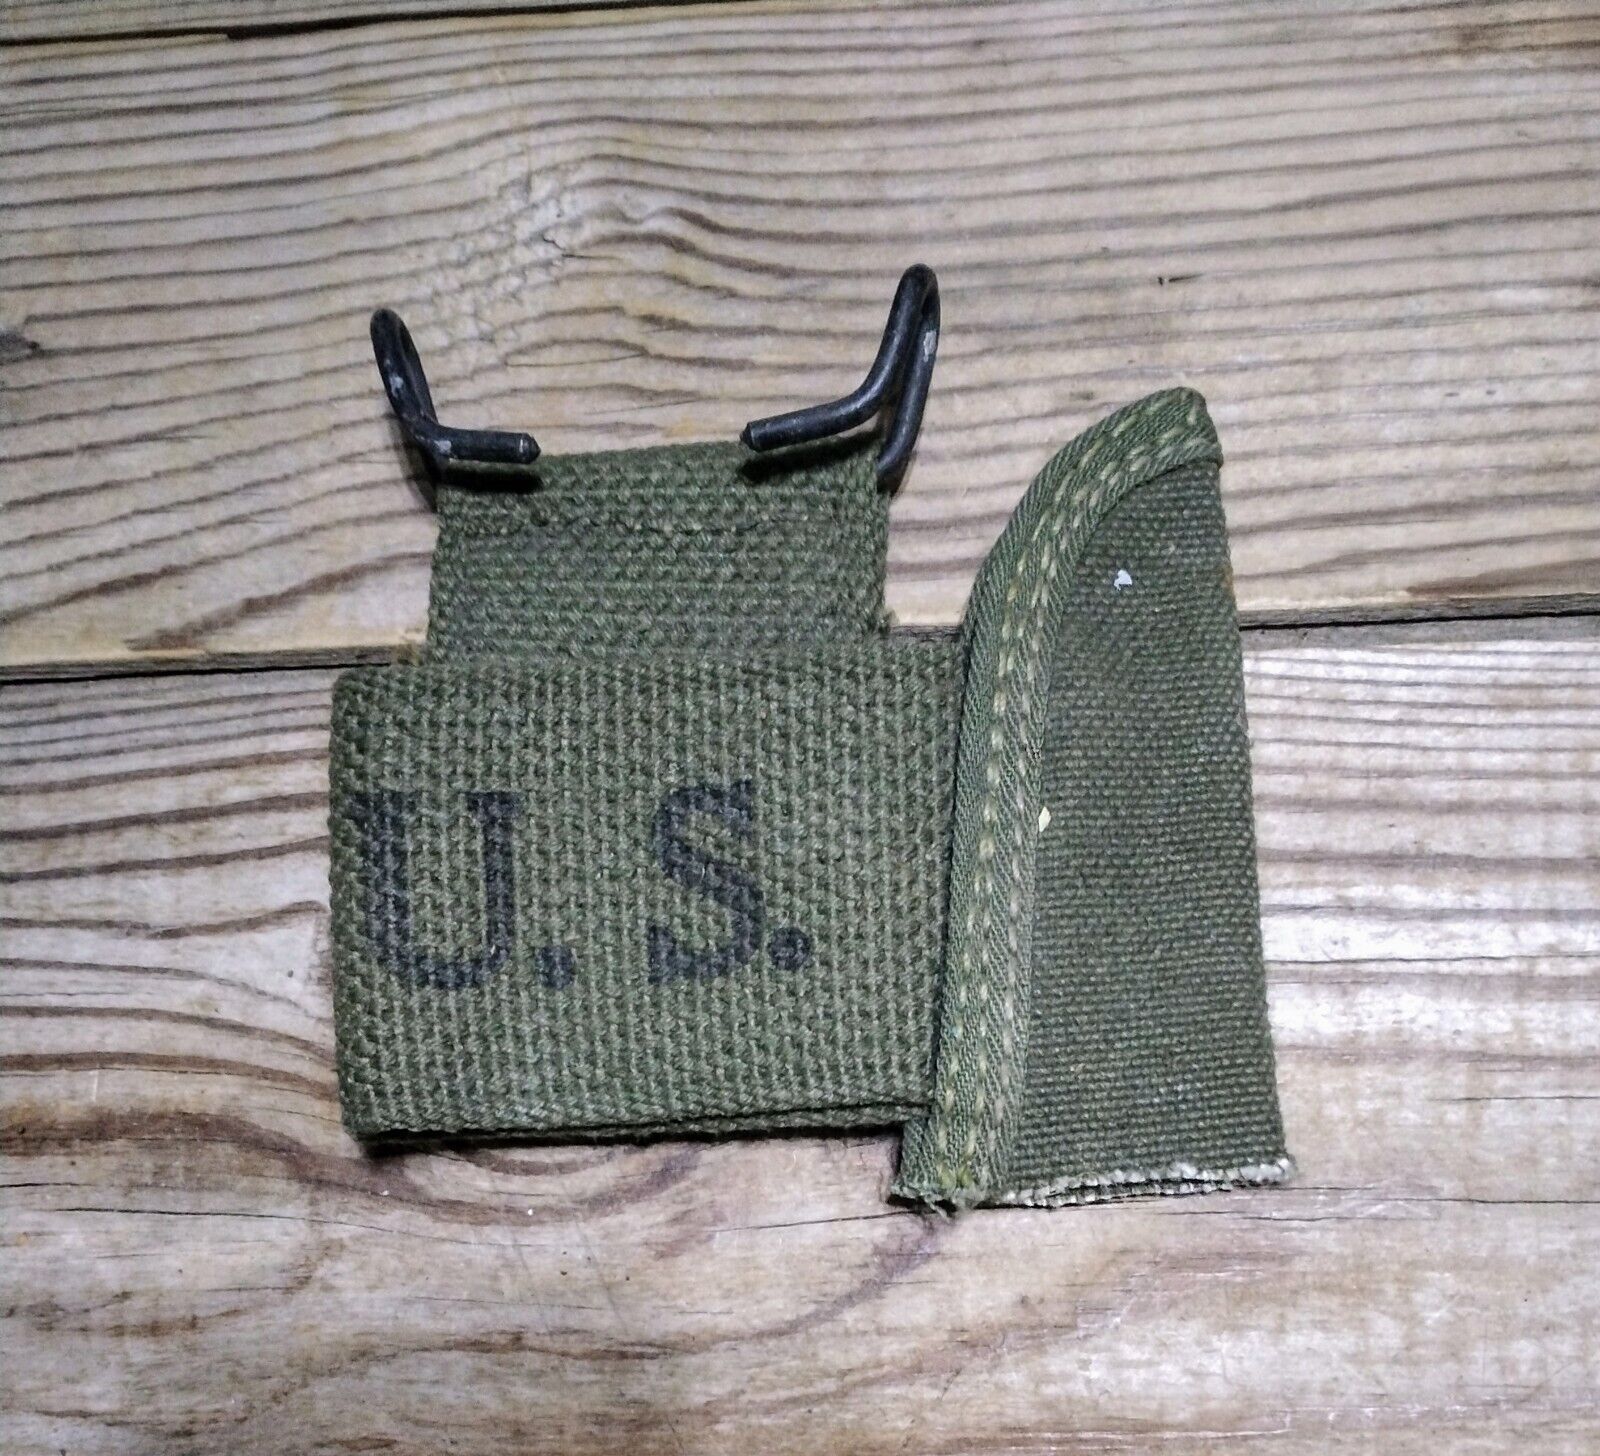 AUTHENTIC WWII WW2 BATON OR HAMMER HANGER CARRIER BELT POUCH